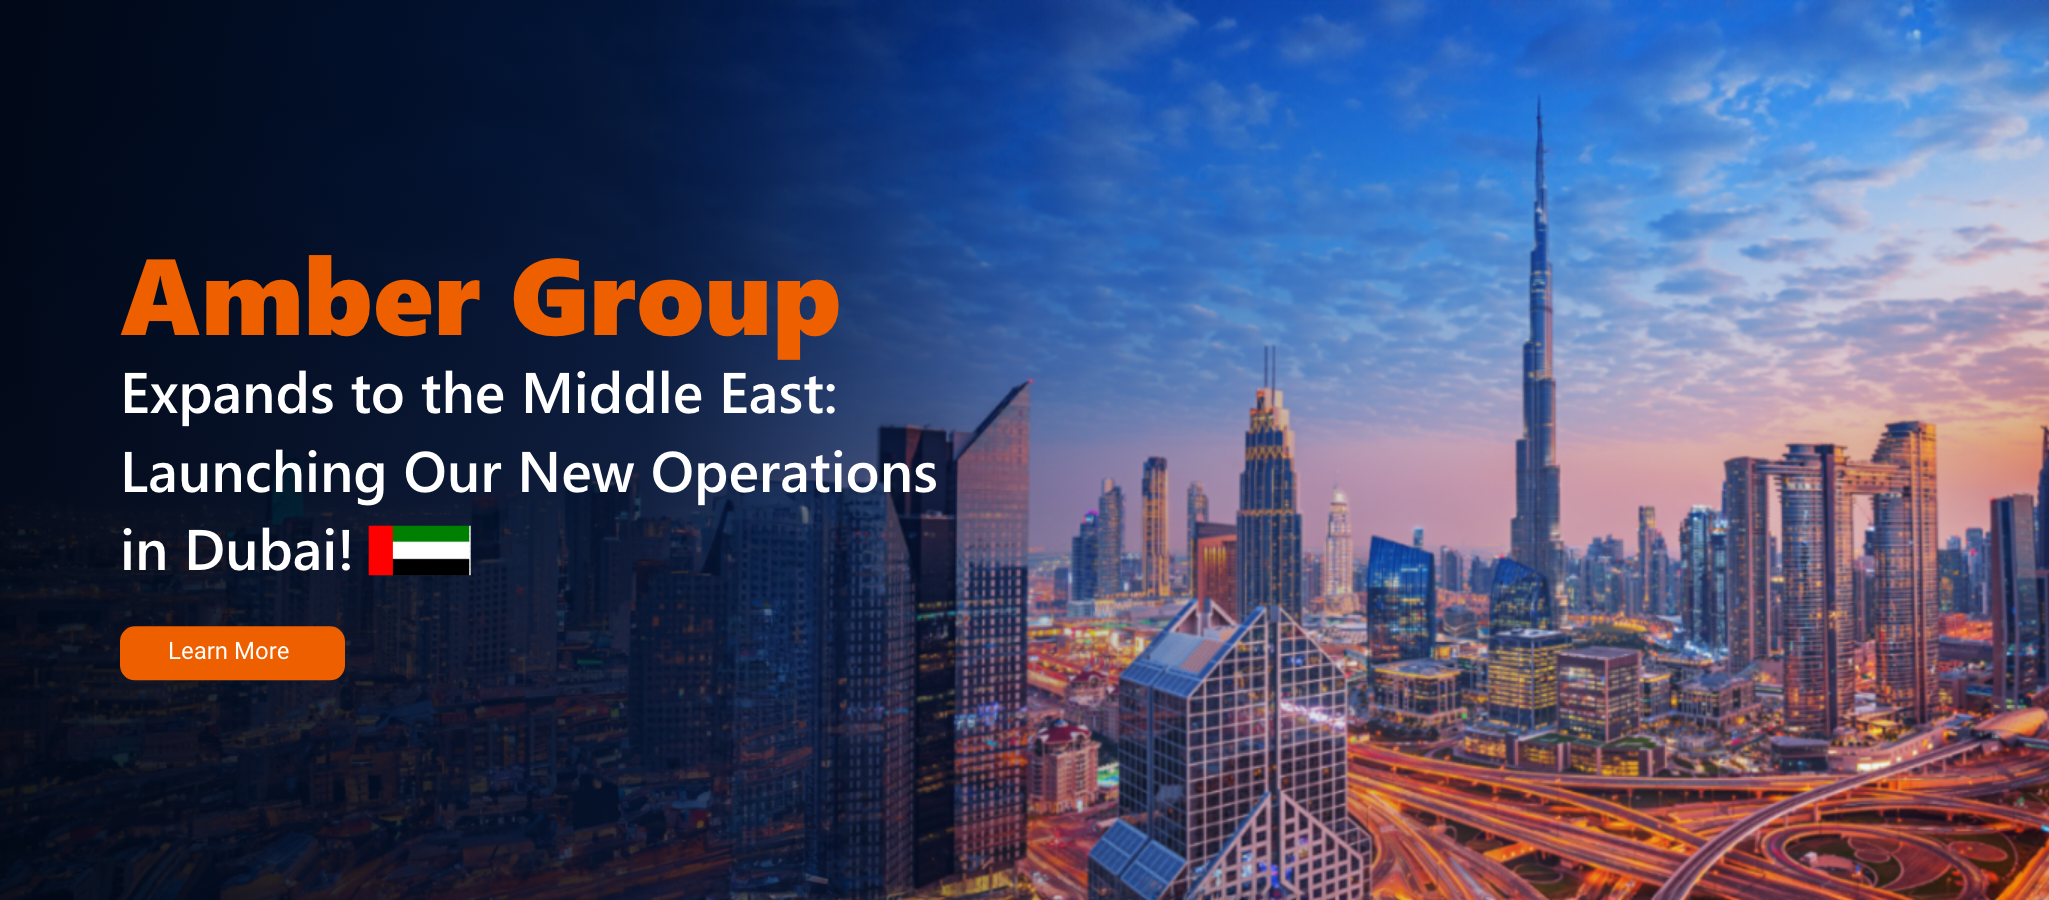 Amber Group Expands to the middle east launching our new operations in Dubai